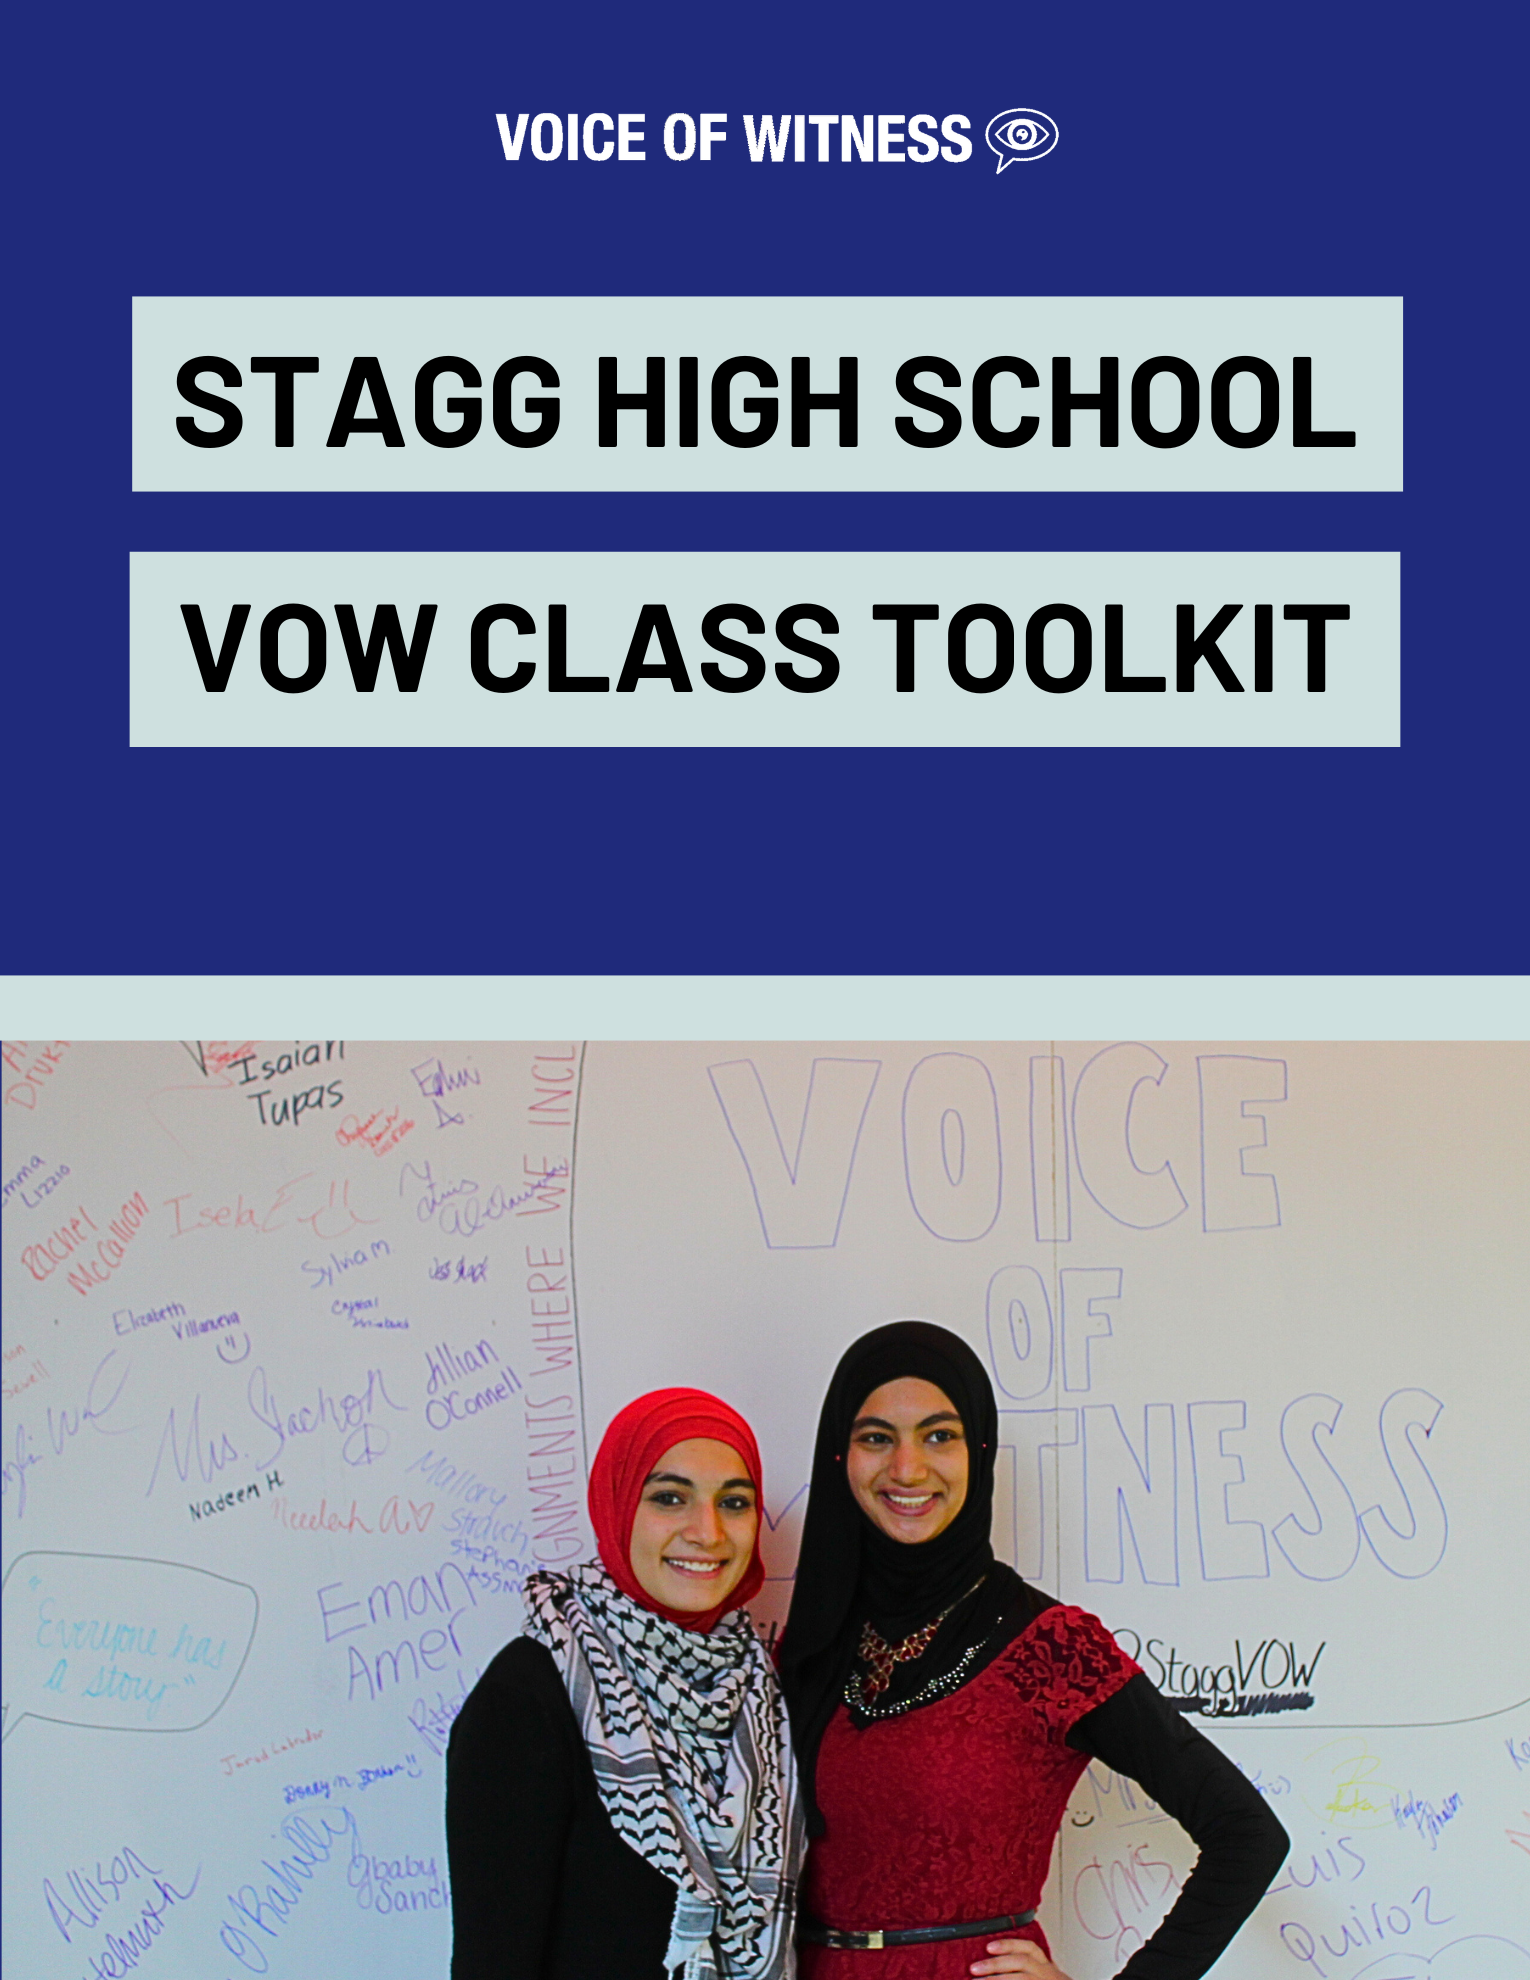 Stagg High School VOW Class Toolkit